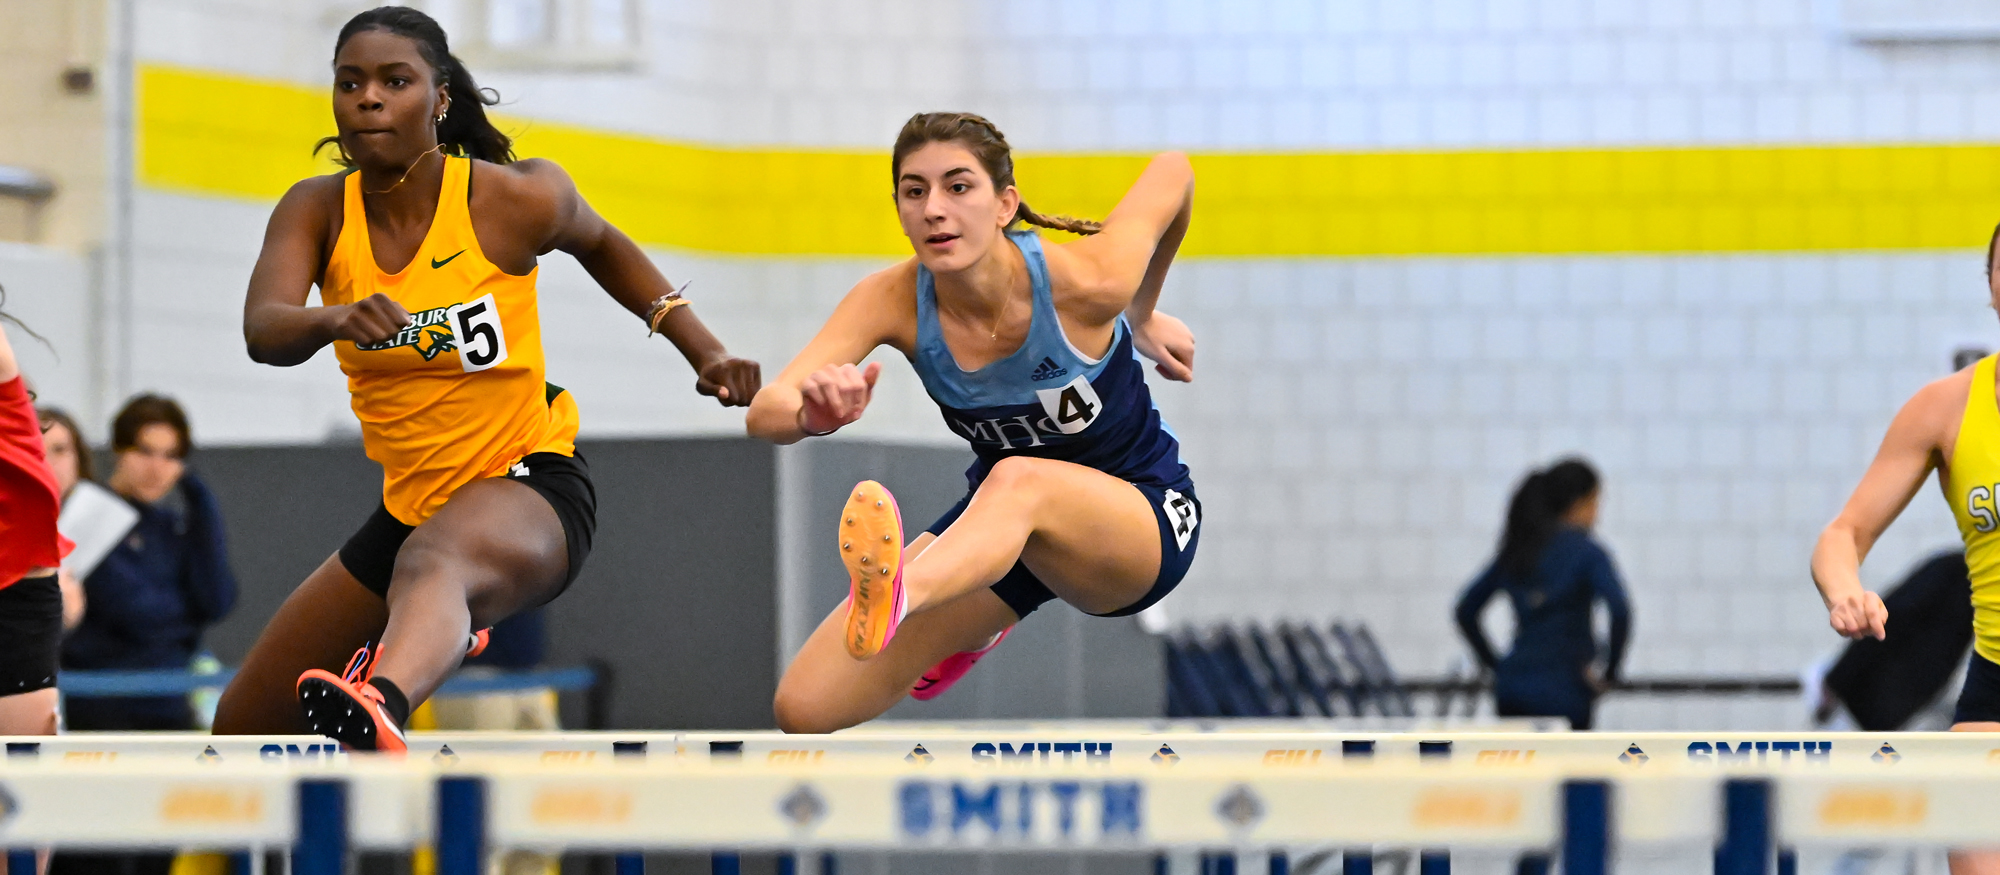 Mount Holyoke first-year Ioanna Tsoni broke the school record in the 60-meter hurdles for the second time this season on Feb. 9, 2024 at the BU Valentine Invitational. (RJB Sports file photo)